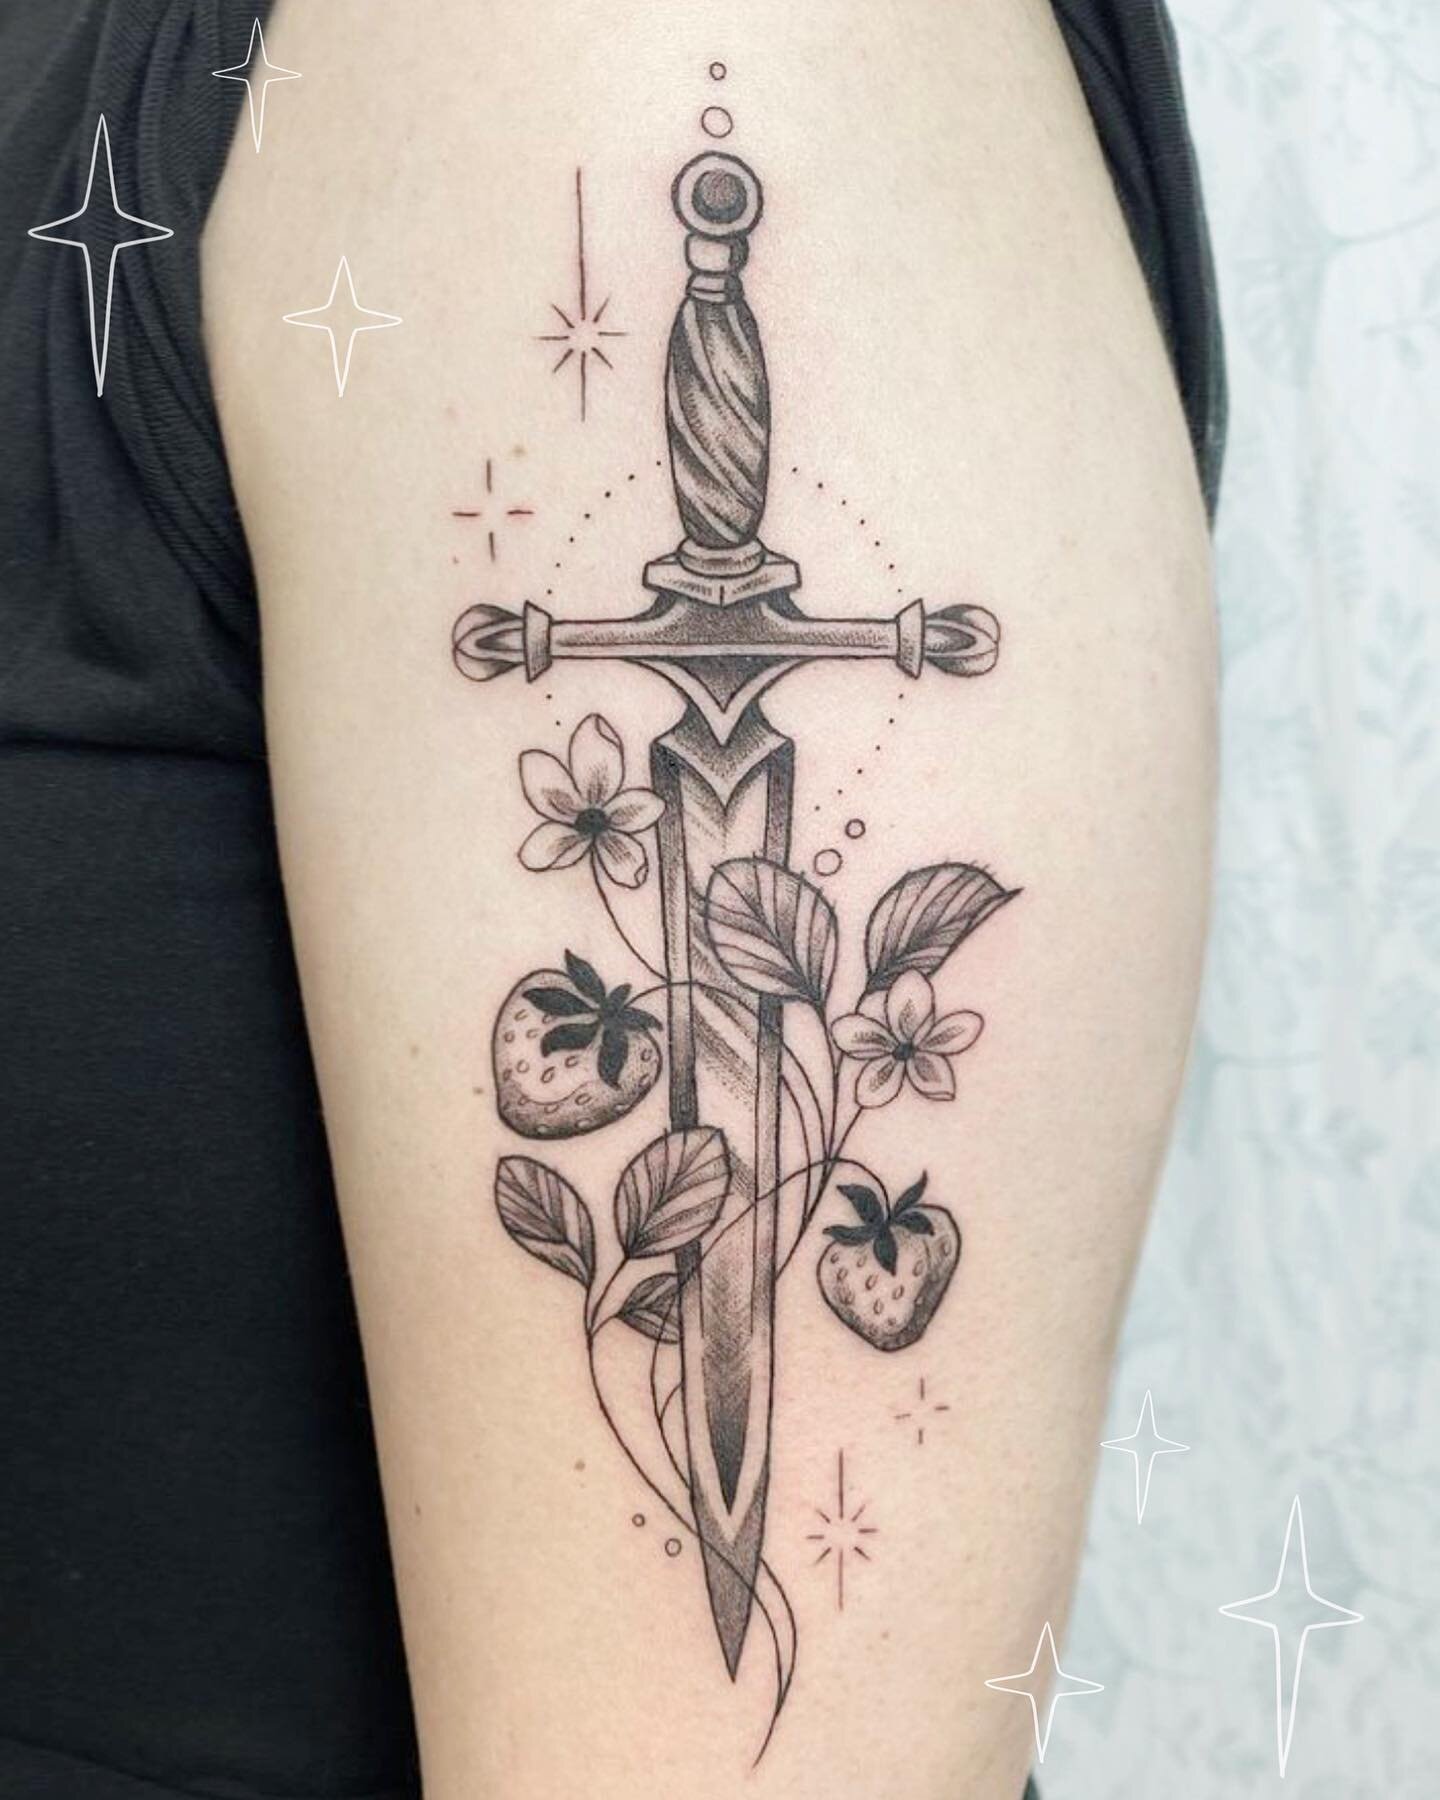 Strawberries and cream? Nah man, strawberries and daggers are where it&rsquo;s at!
This beautiful flash piece was done by Sydney @hrtshpdfruit! 🍓🗡
.
.
.
.
.
#daggertattoo #swordtattoo #strawberrytattoo #fruittattoo #illustrativetattoo #illustration